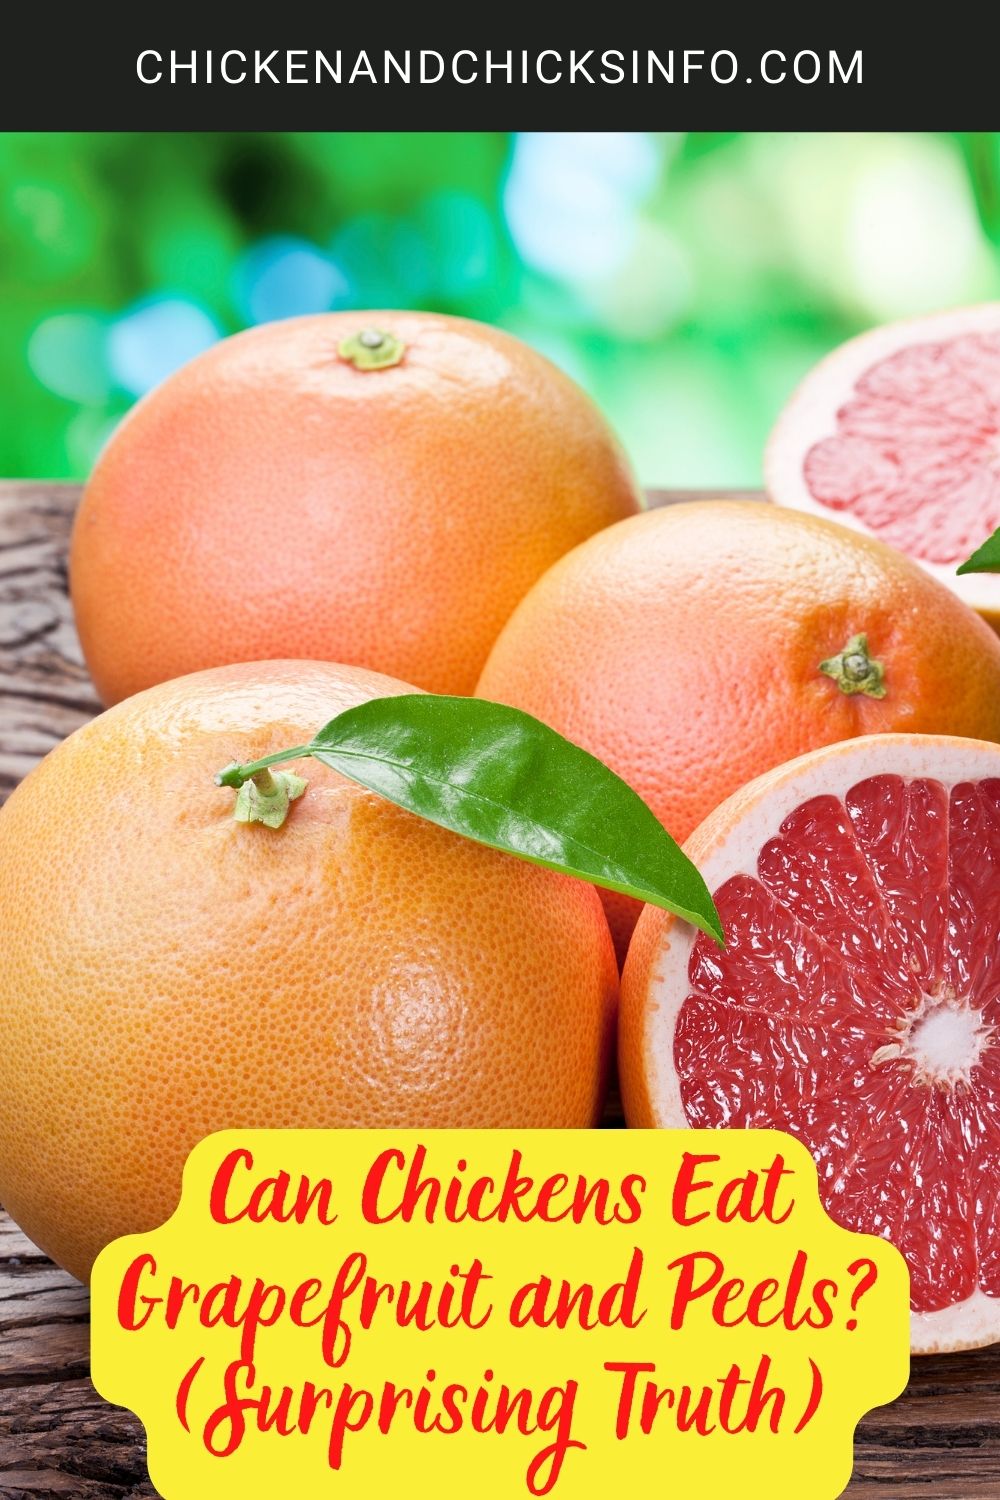 Can Chickens Eat Grapefruit and Peels? (Surprising Truth) poster.
